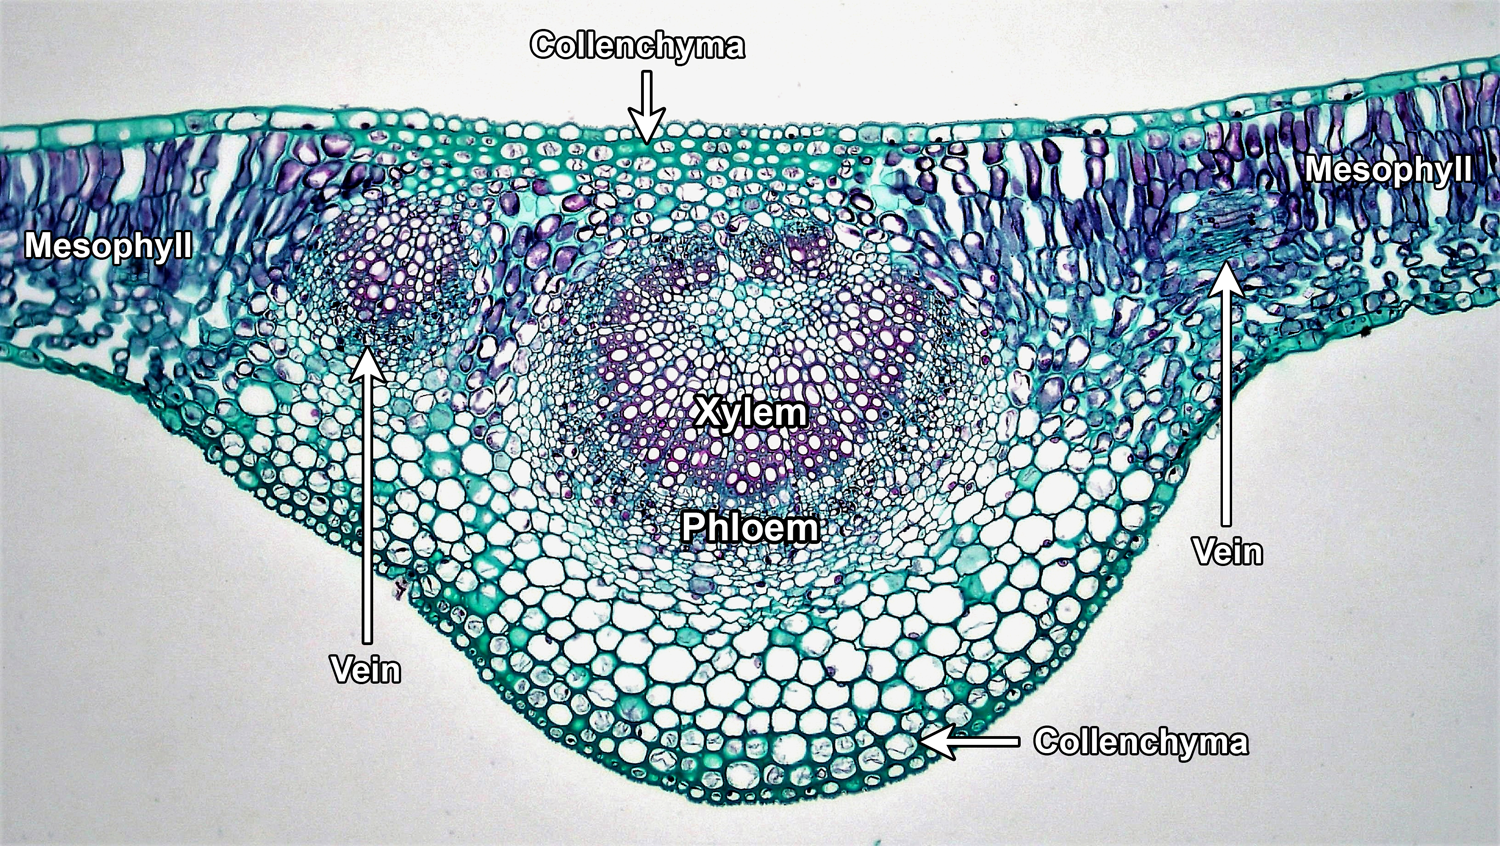 Labelled cross section through the midvein of a lilac leaf, showing veins, mesophyll, and collenchyma. Collenchyma is a supporting tissue.